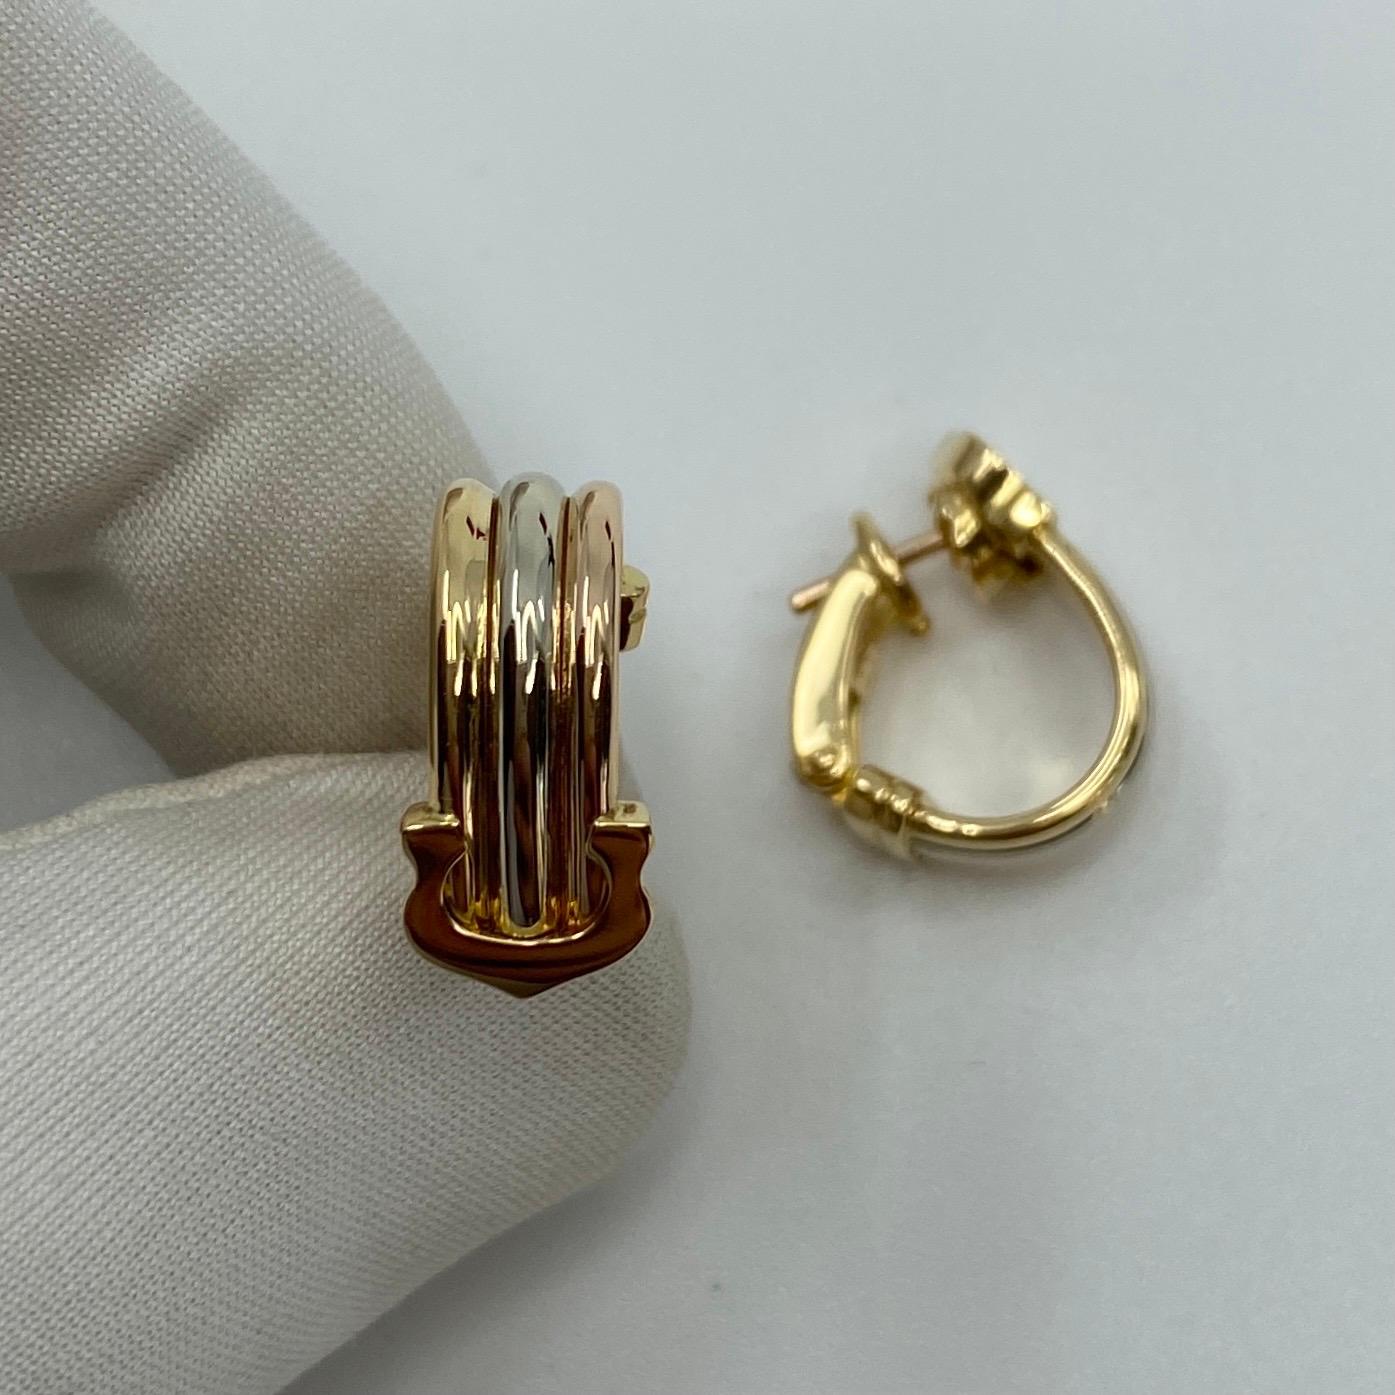 Vintage Cartier Double C 18k Multi Tone Gold Hoop Earrings.

Beautiful earrings featuring multi tone gold bands (yellow, white and rose gold) and the iconic Cartier C's. 
Fitted with secure and comfortable clip-on over post fastening.

Each earring